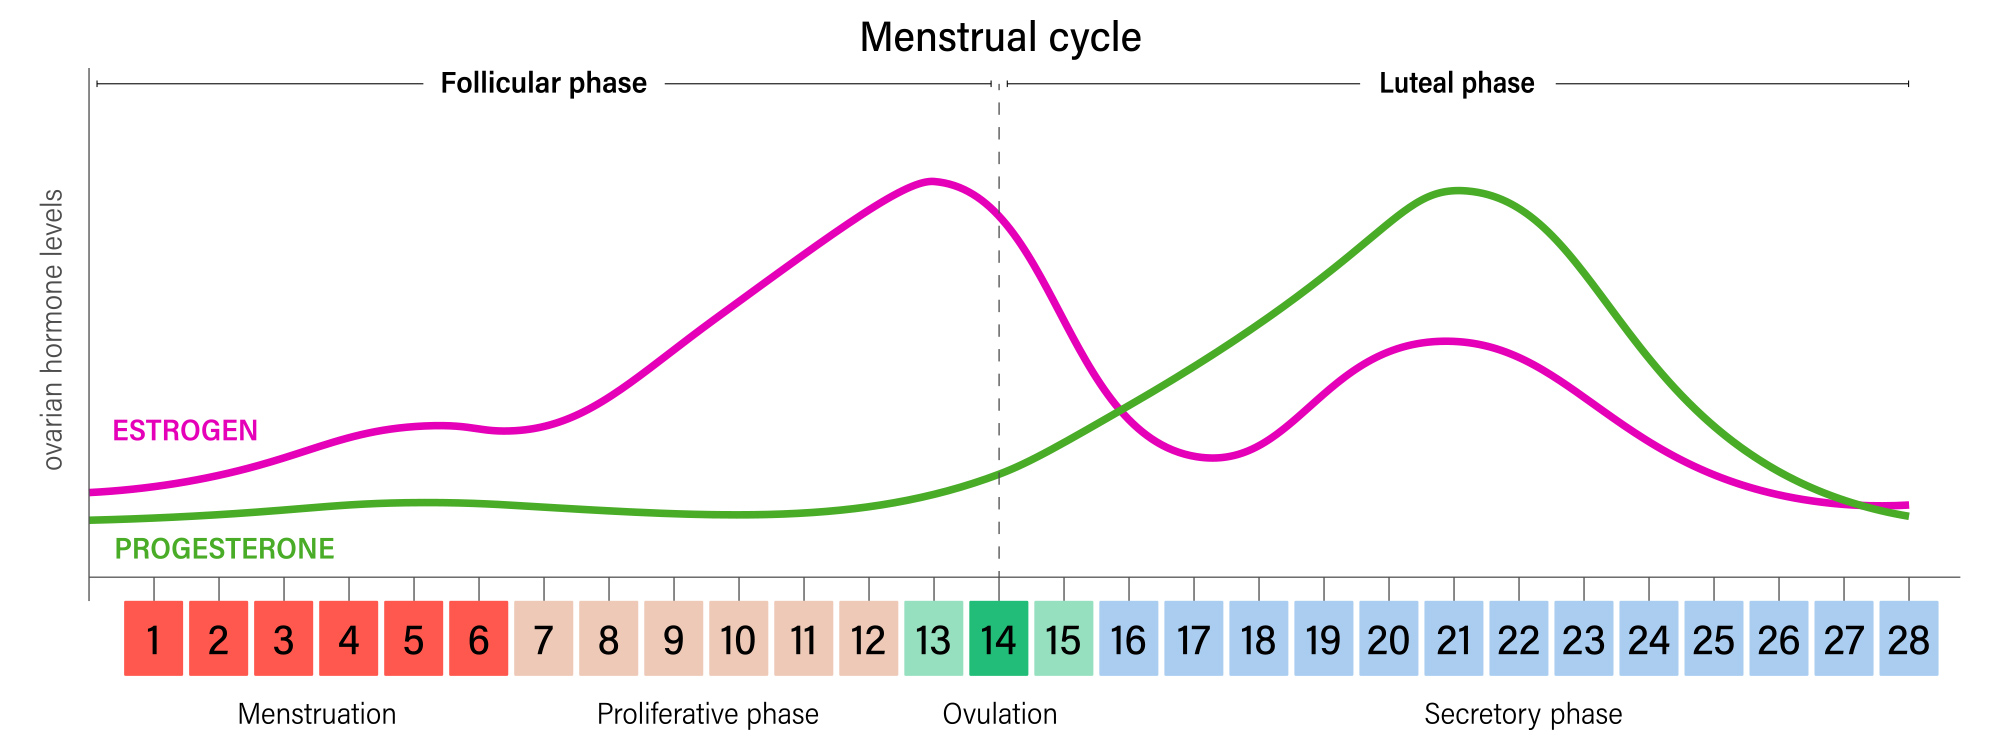 Luteal Phase of the Menstrual Cycle – Symptoms, Length, Pregnancy